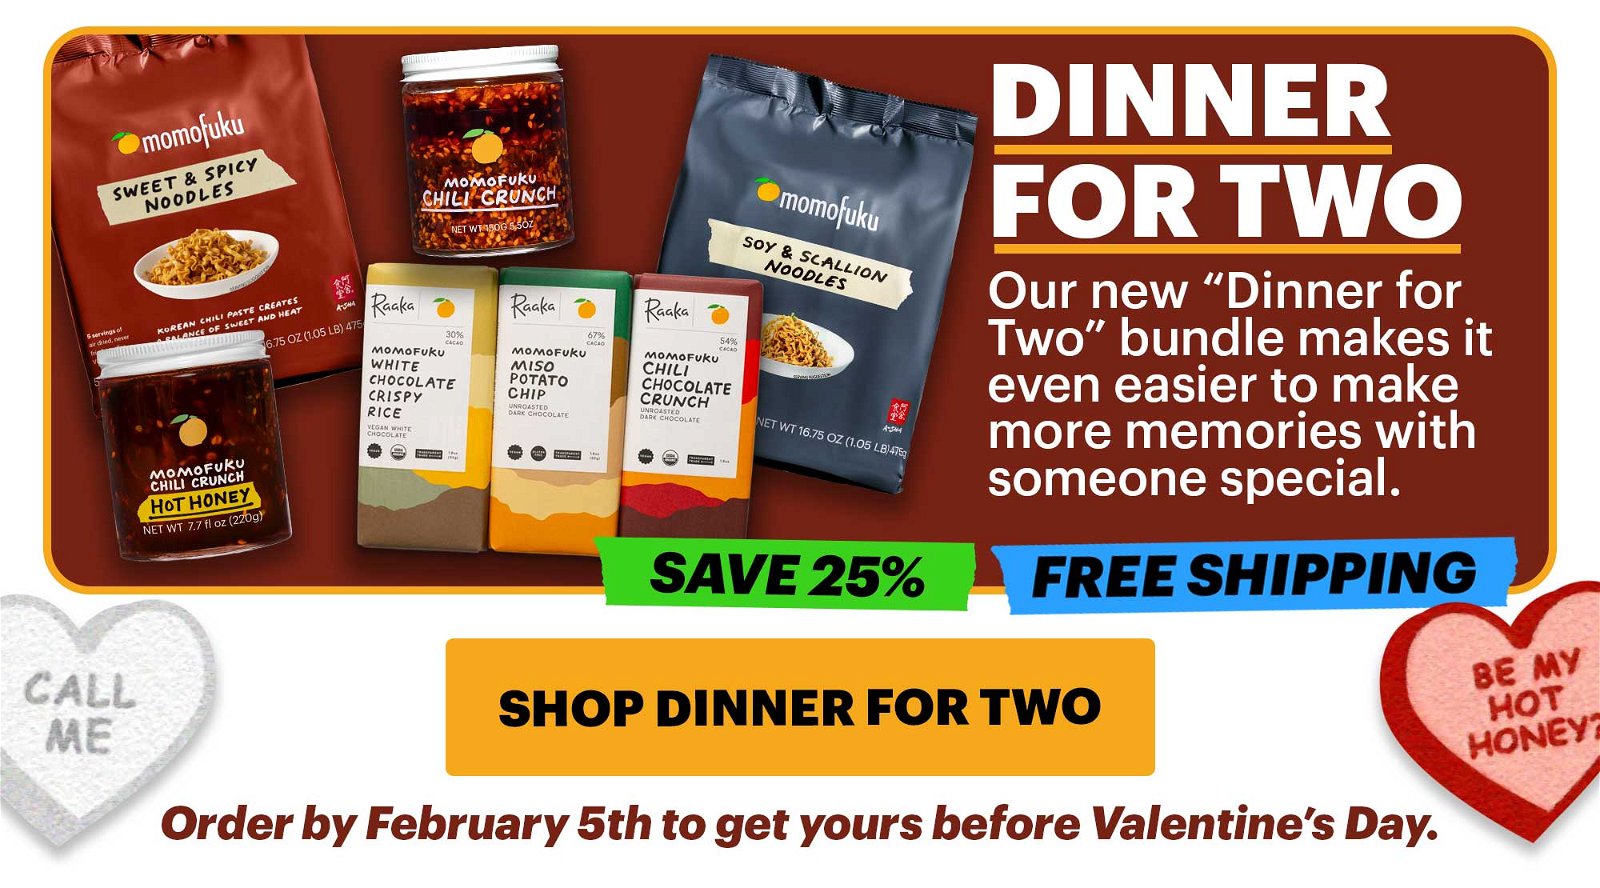 DINNER FOR TWO. Our new "Dinner for Two" bundle makes it even easier to make more memories with someone special. SAVE 25%. FREE SHIPPING. SHOP DINNER FOR TWO. Order by February 5th to get yours before Valentine's Day.